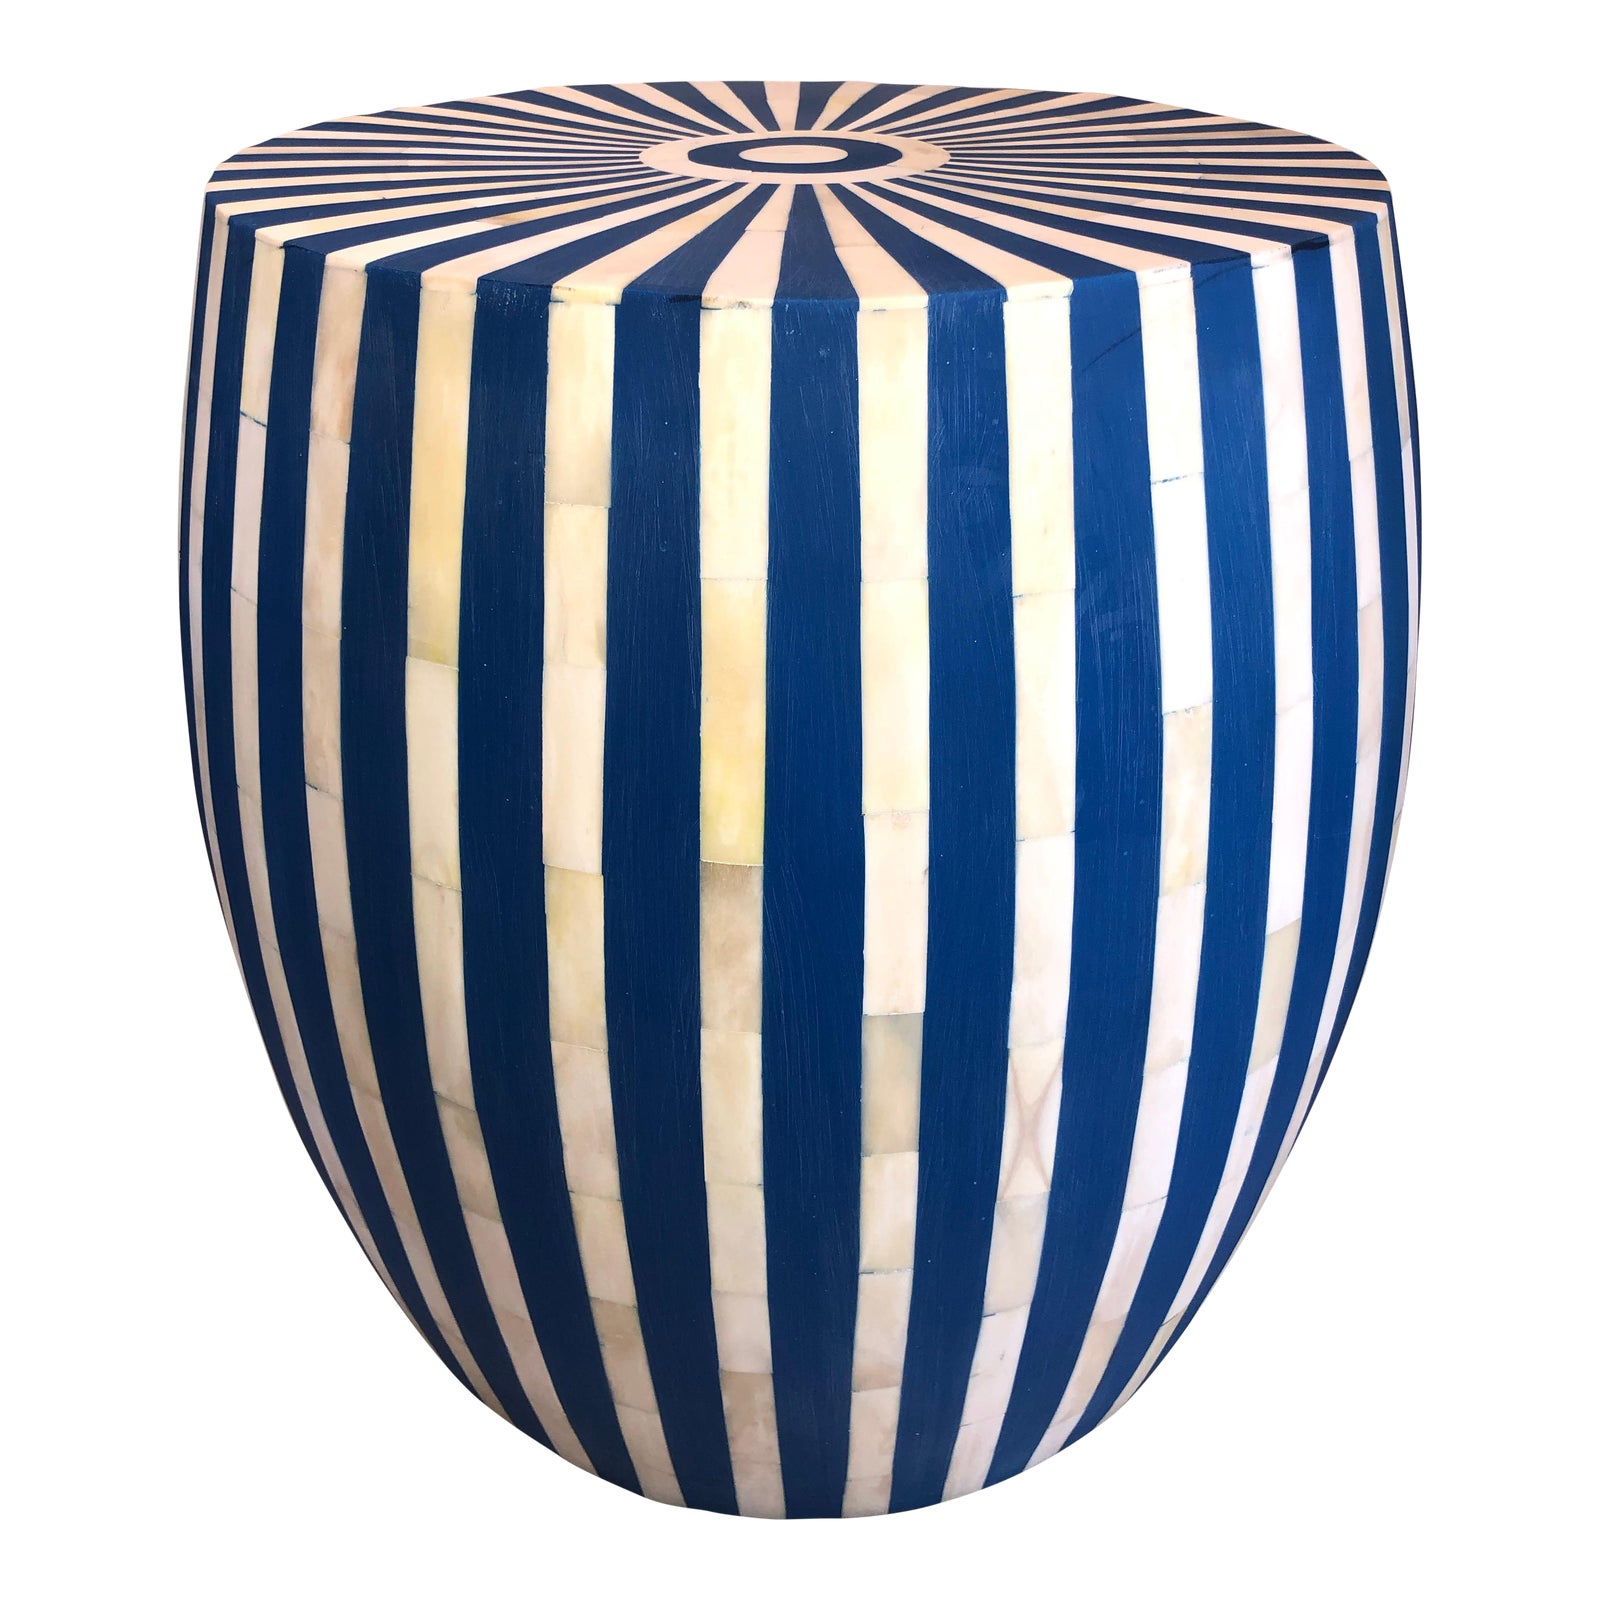 blue-and-white-inlayed-striped-side-table-9205